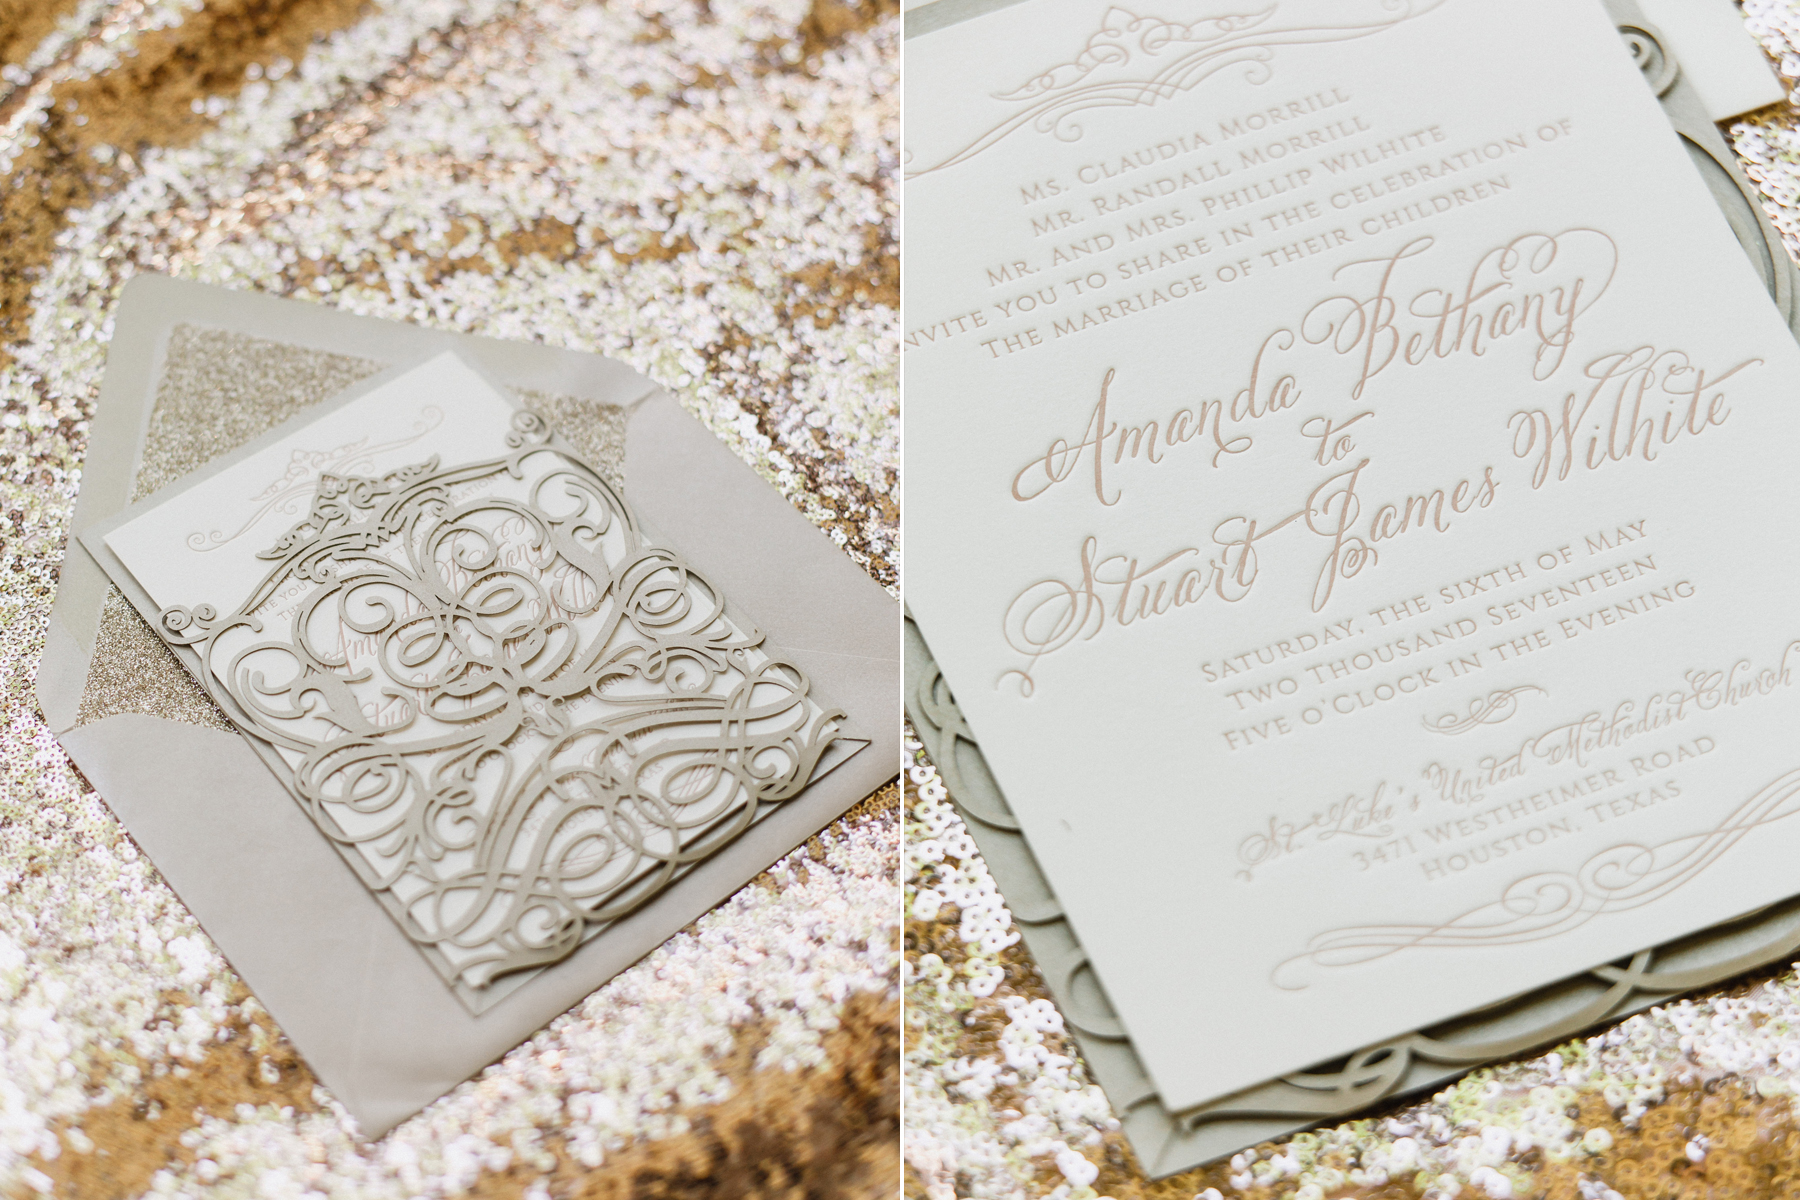  daytoremember.net | Daniel Colvin Photography | Wedding Stationery | A Day To Remember Houston Wedding Planning and Design 